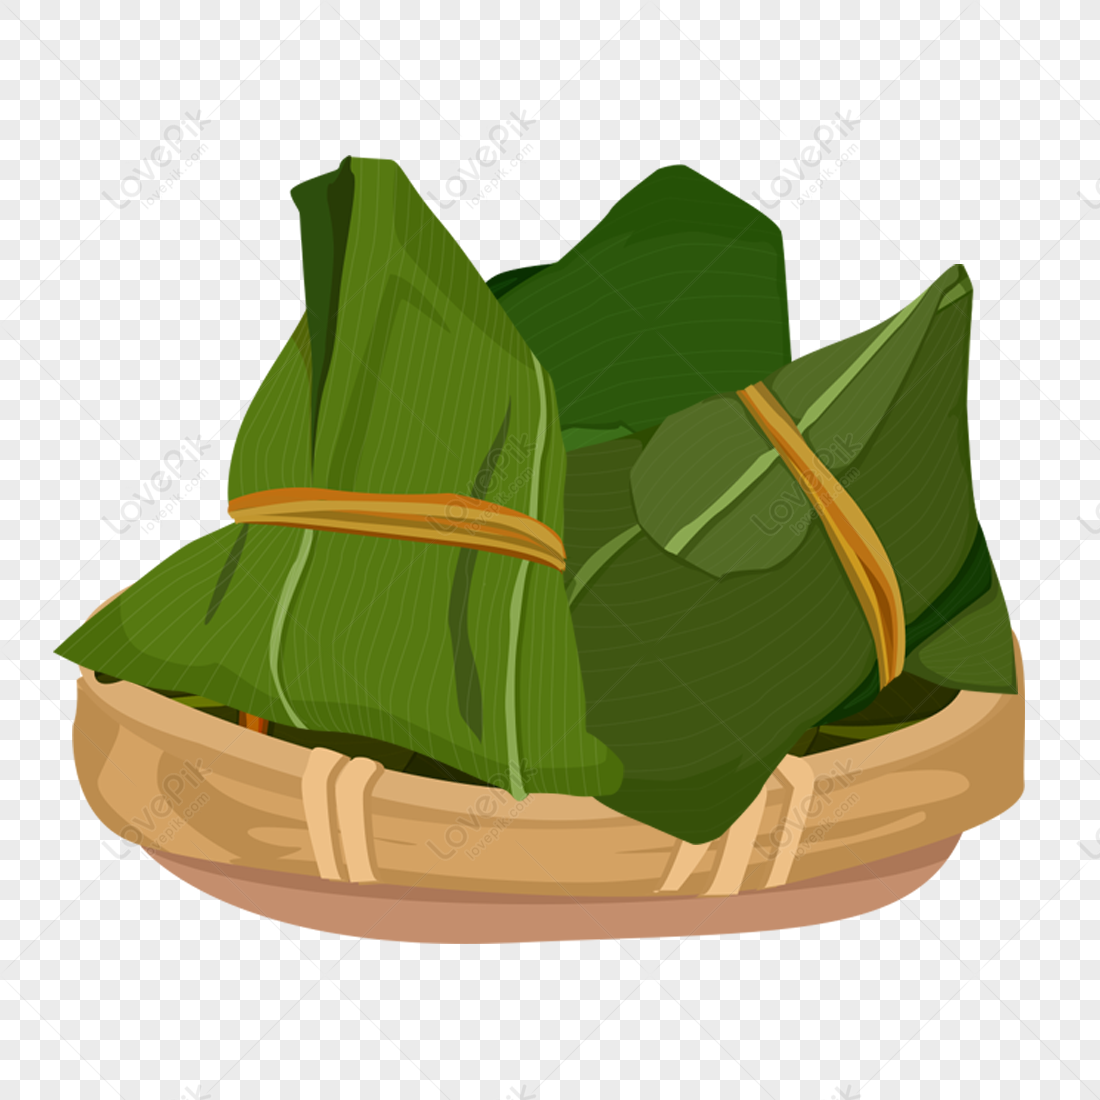 rice-dumplings-leaves-images-hd-pictures-for-free-vectors-psd